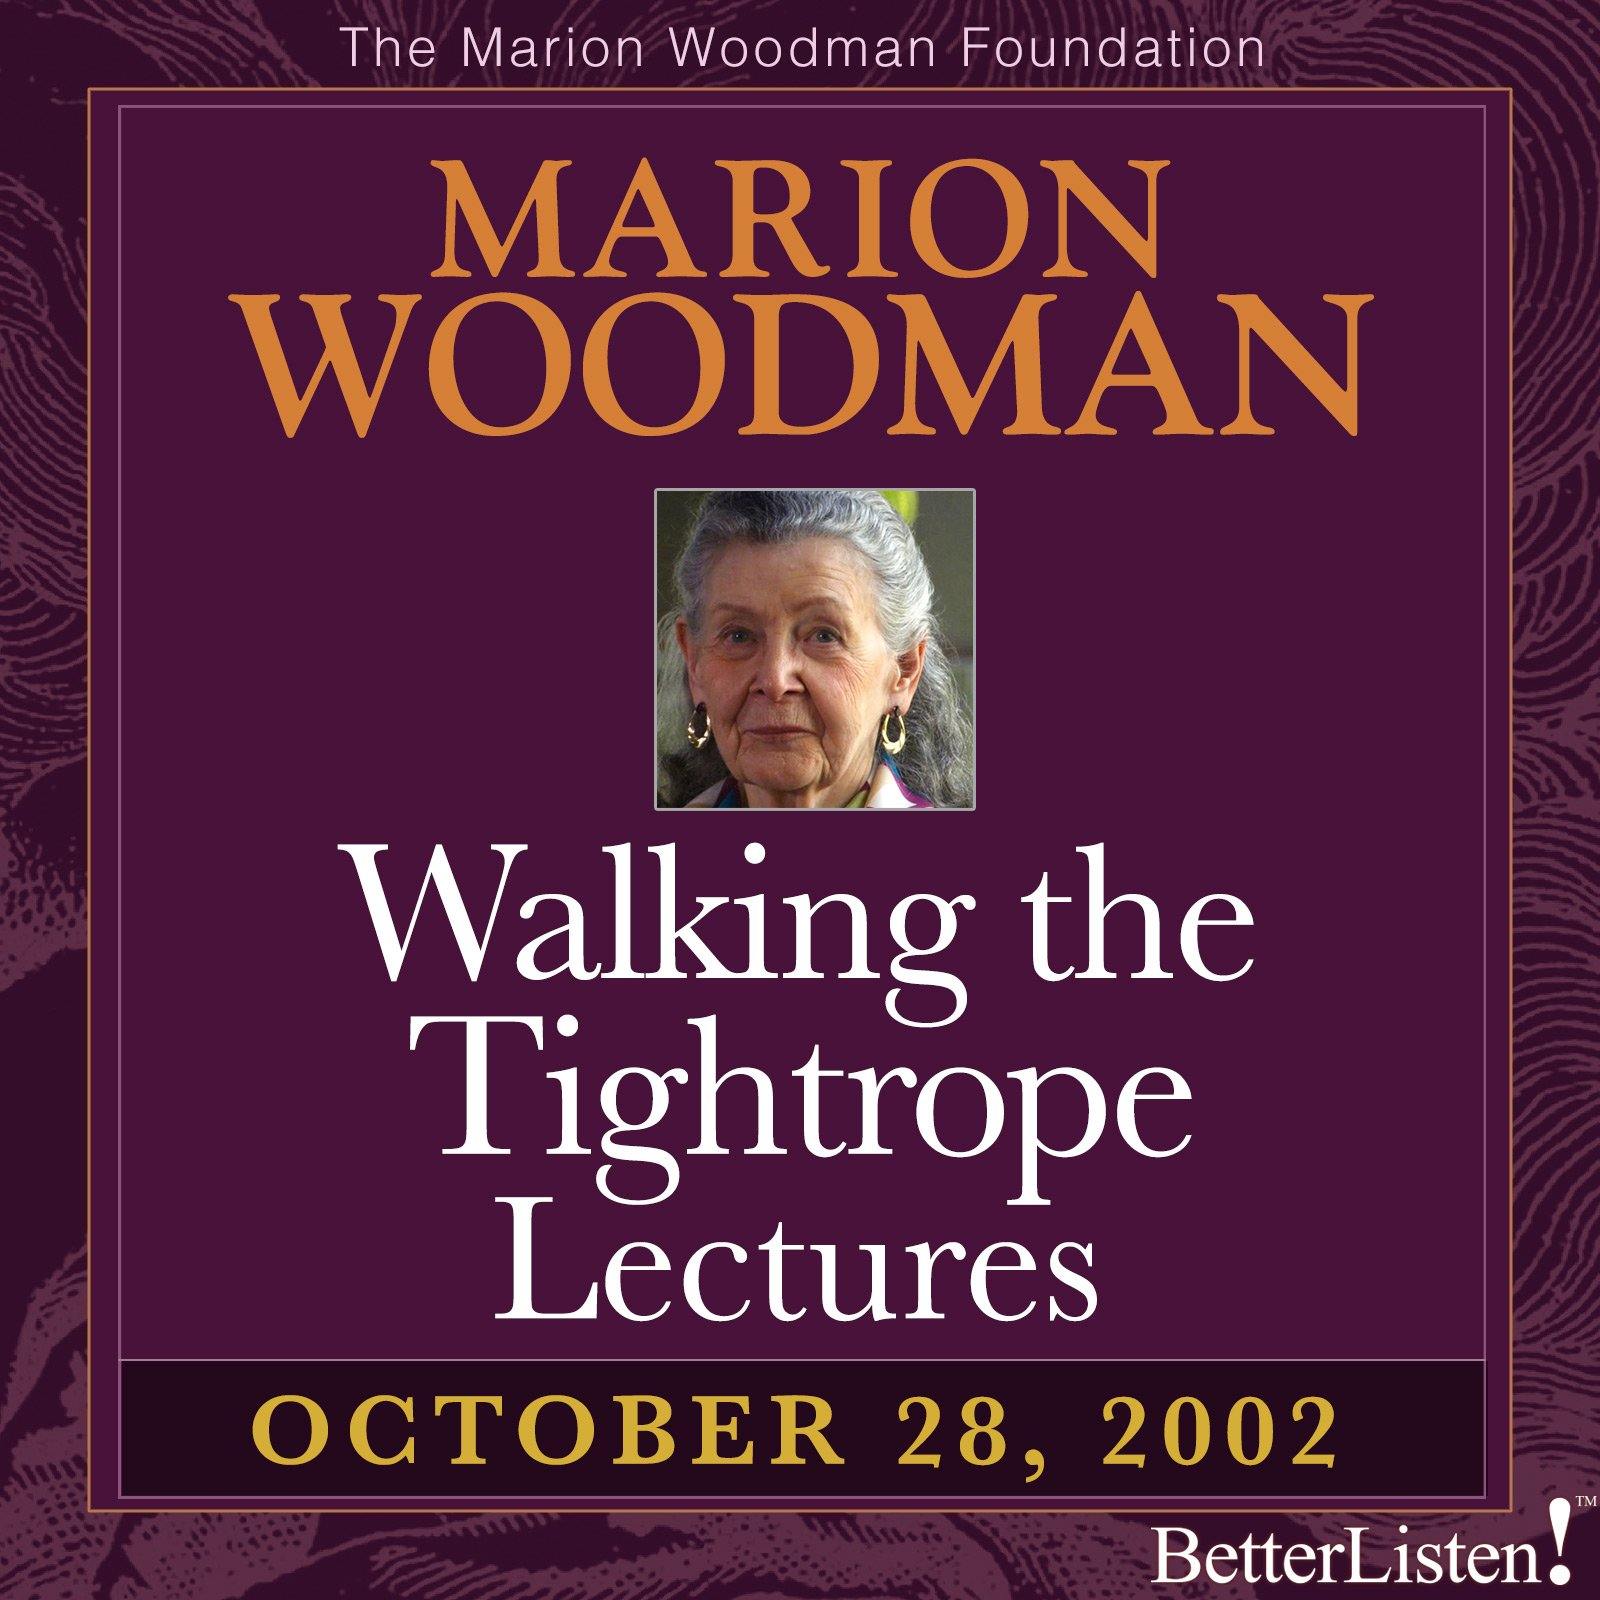 Walking the Tightrope Lectures Marion Woodman #4 10-28-02 - BetterListen!